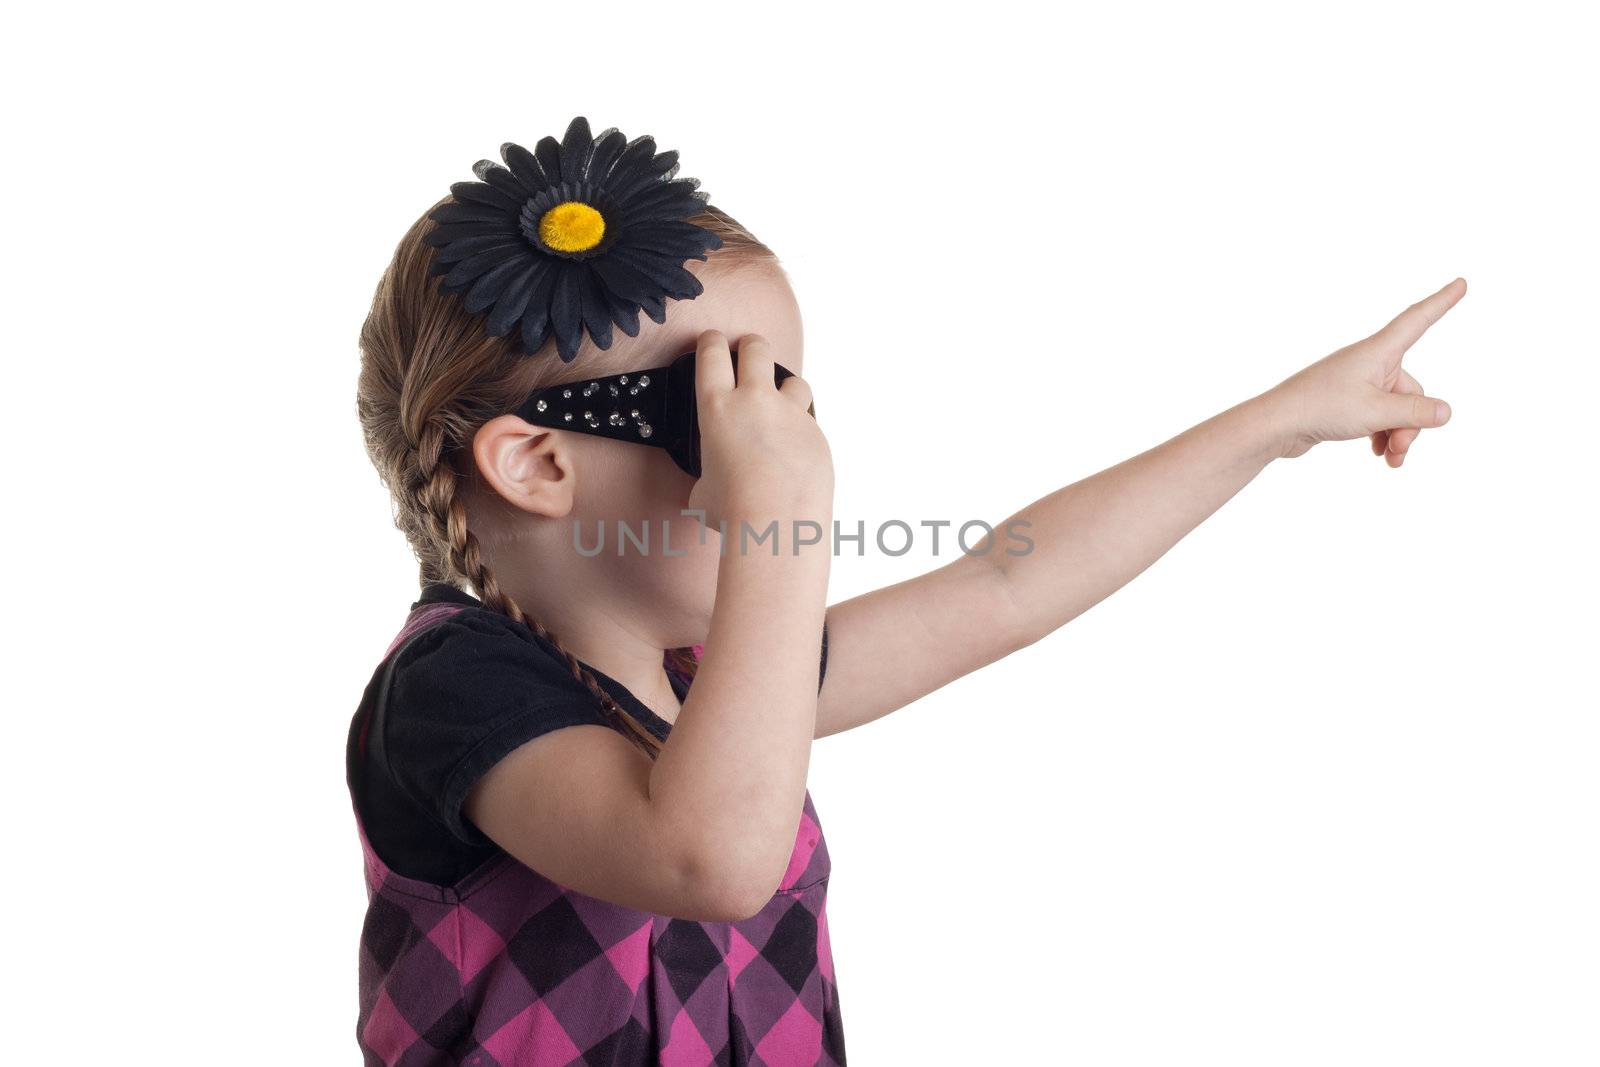 A girl pointing up in the are at something, as she grabs at her sunglasses to remove them.